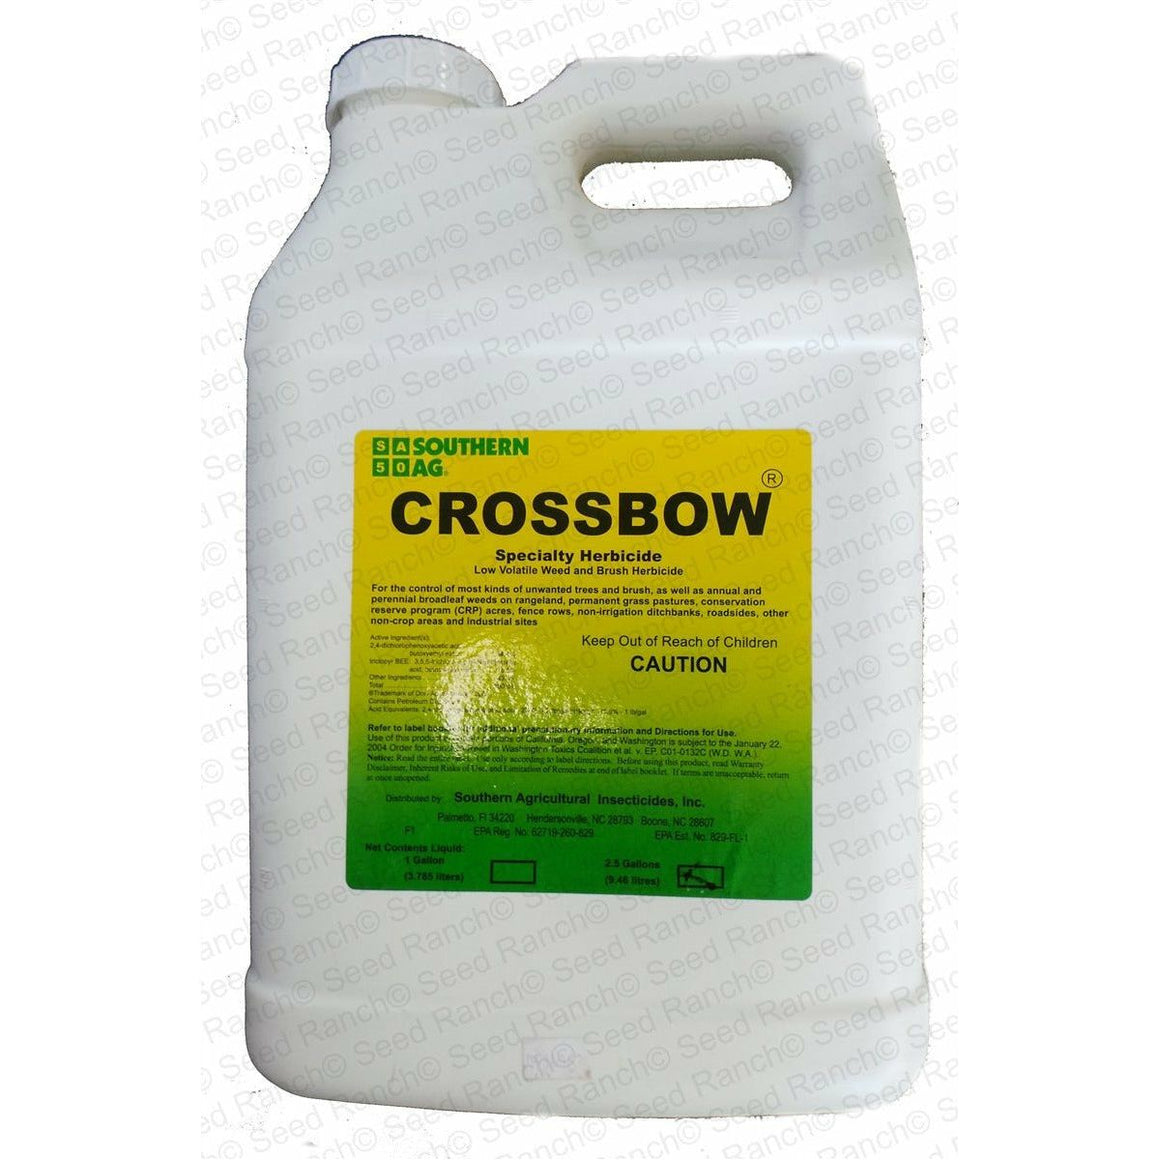 Crossbow Specialty Herbicide - 2.5 Gallon. - Seed World